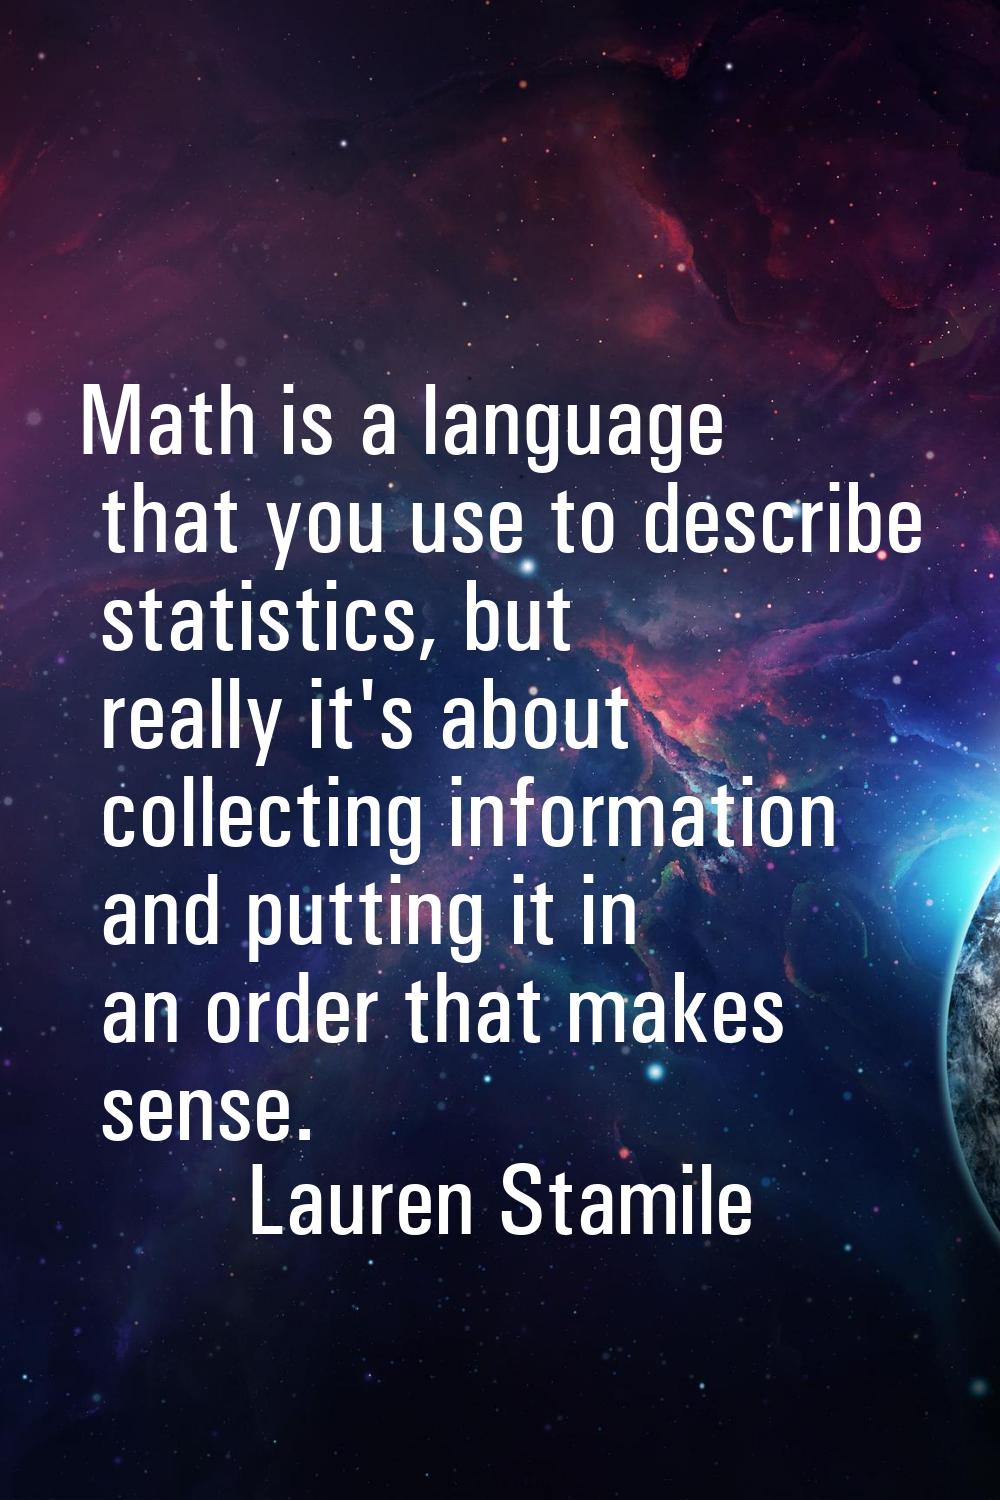 Math is a language that you use to describe statistics, but really it's about collecting informatio